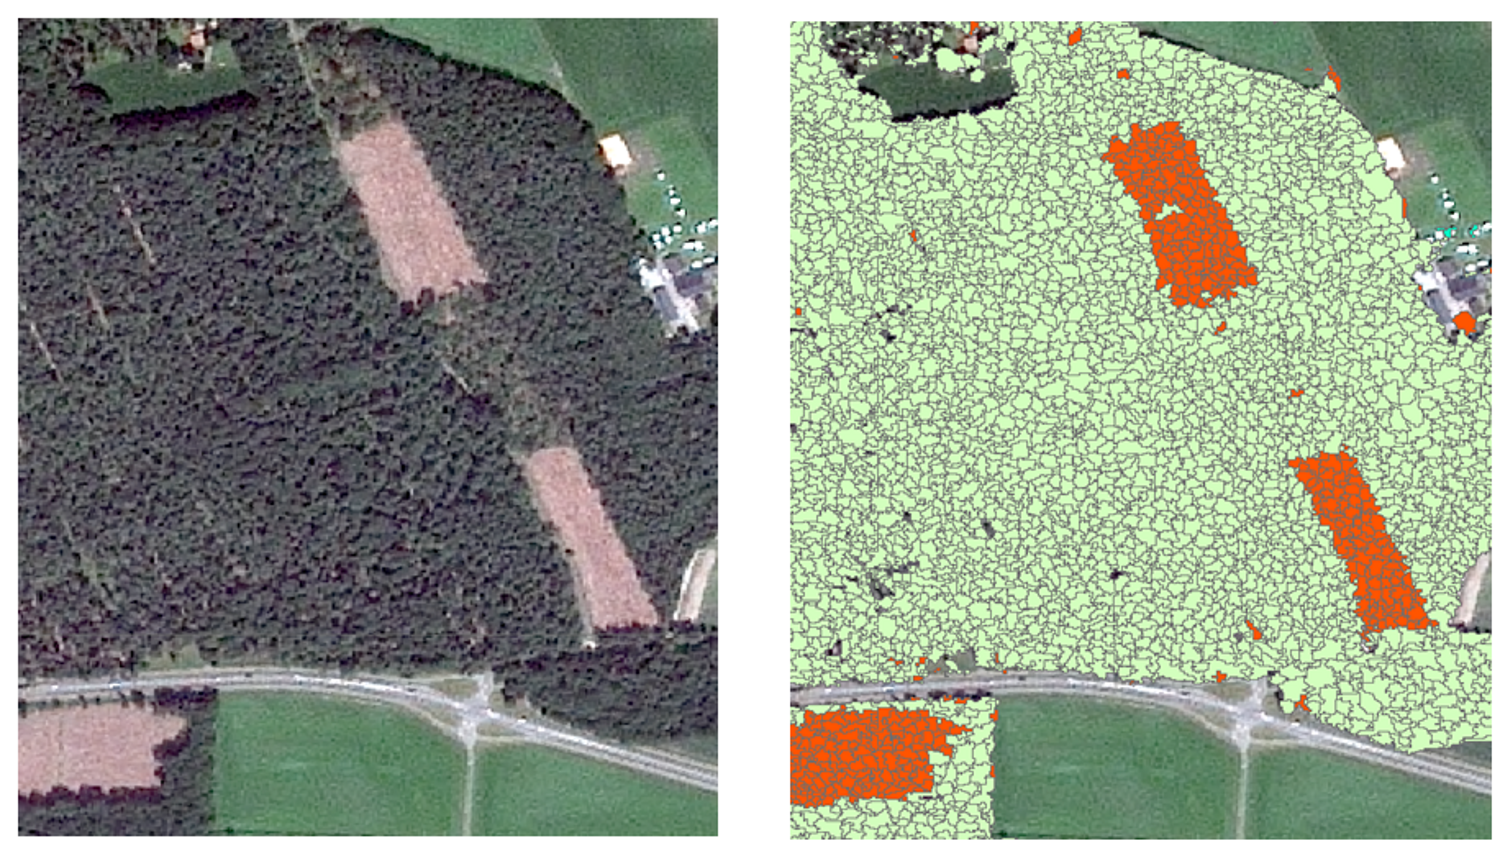 Satellite imagery is used to detect illegal logging in forests